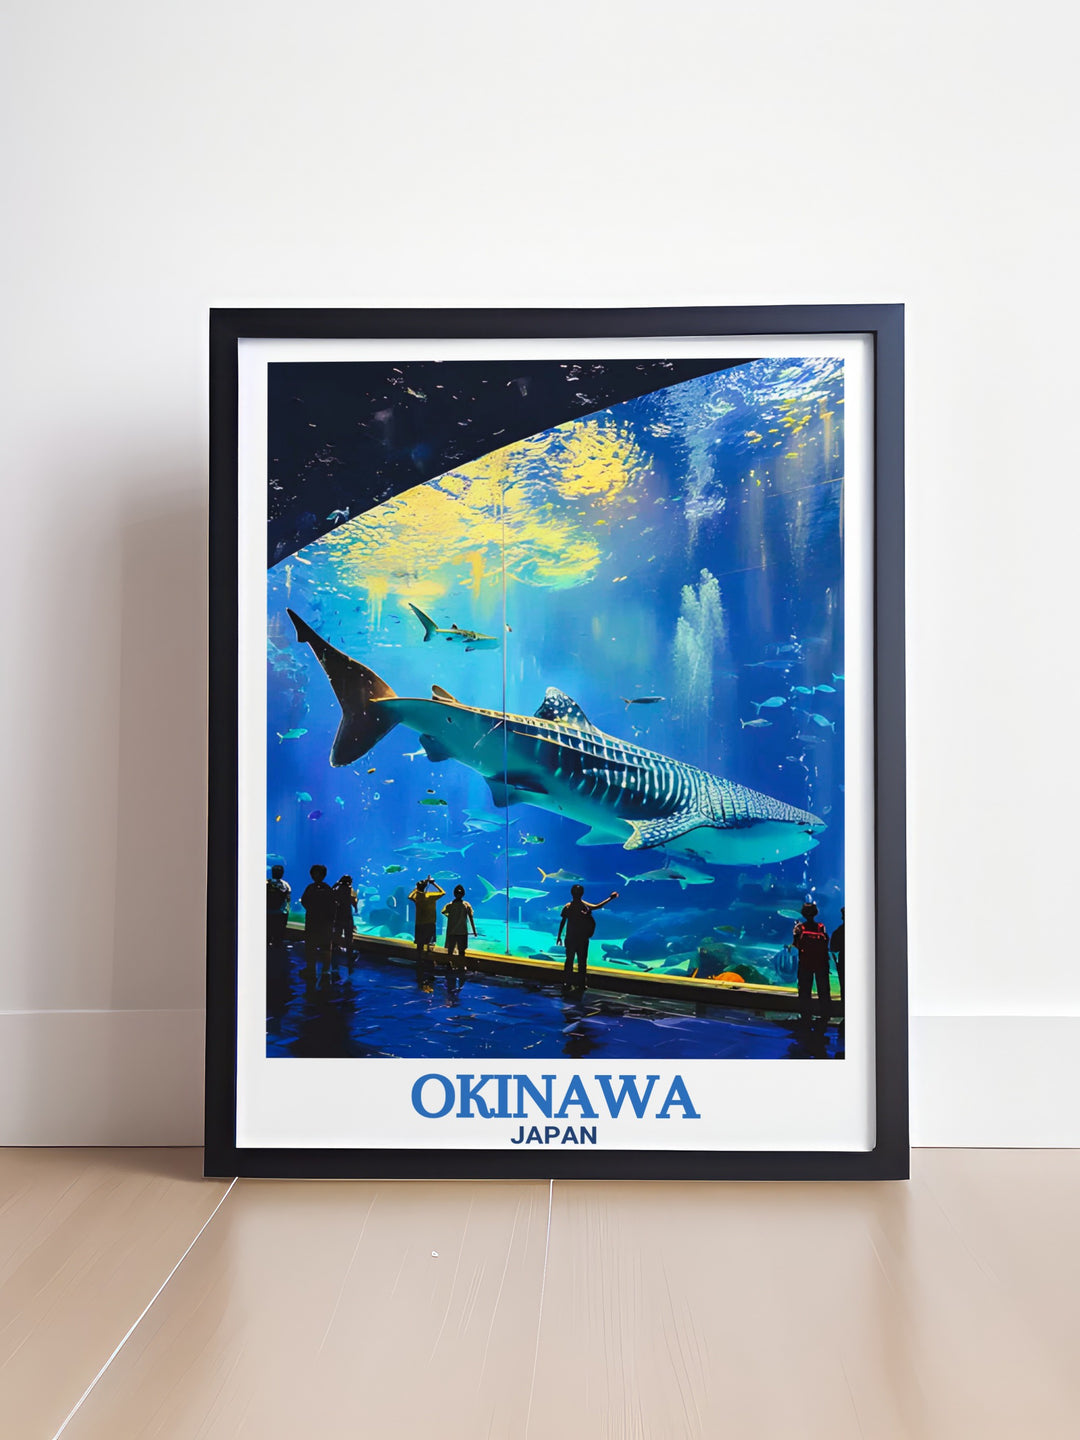 High quality Okinawa Churaumi Aquarium prints featuring the serene blues and dynamic marine life of Okinawa ideal for ocean enthusiasts and admirers of Japanese culture